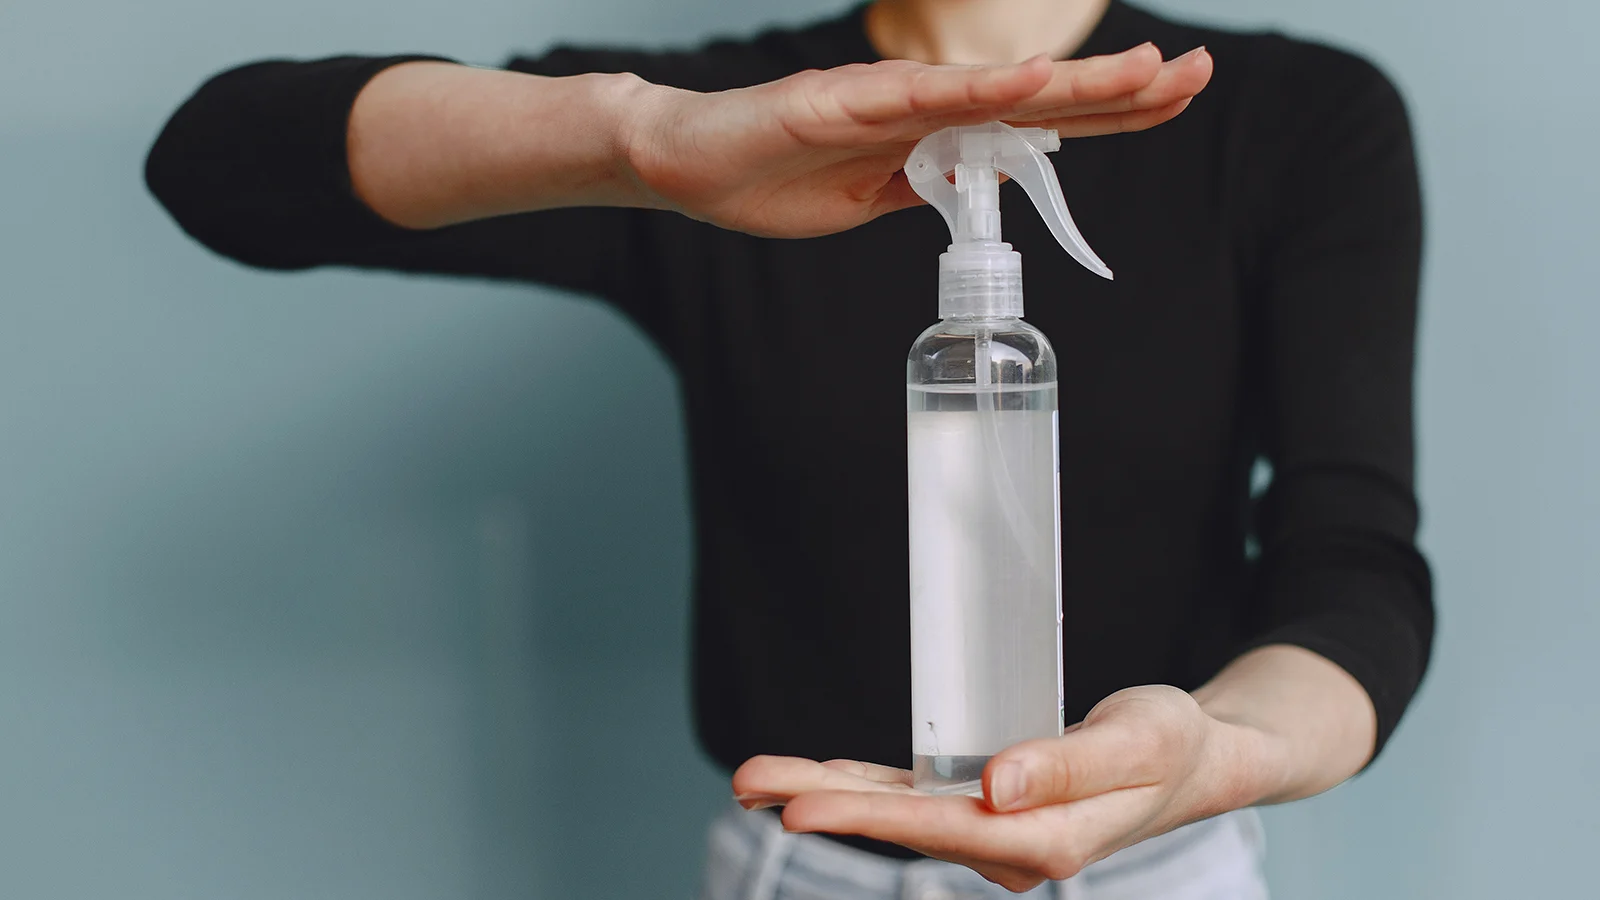 A woman holding a spray bottle.